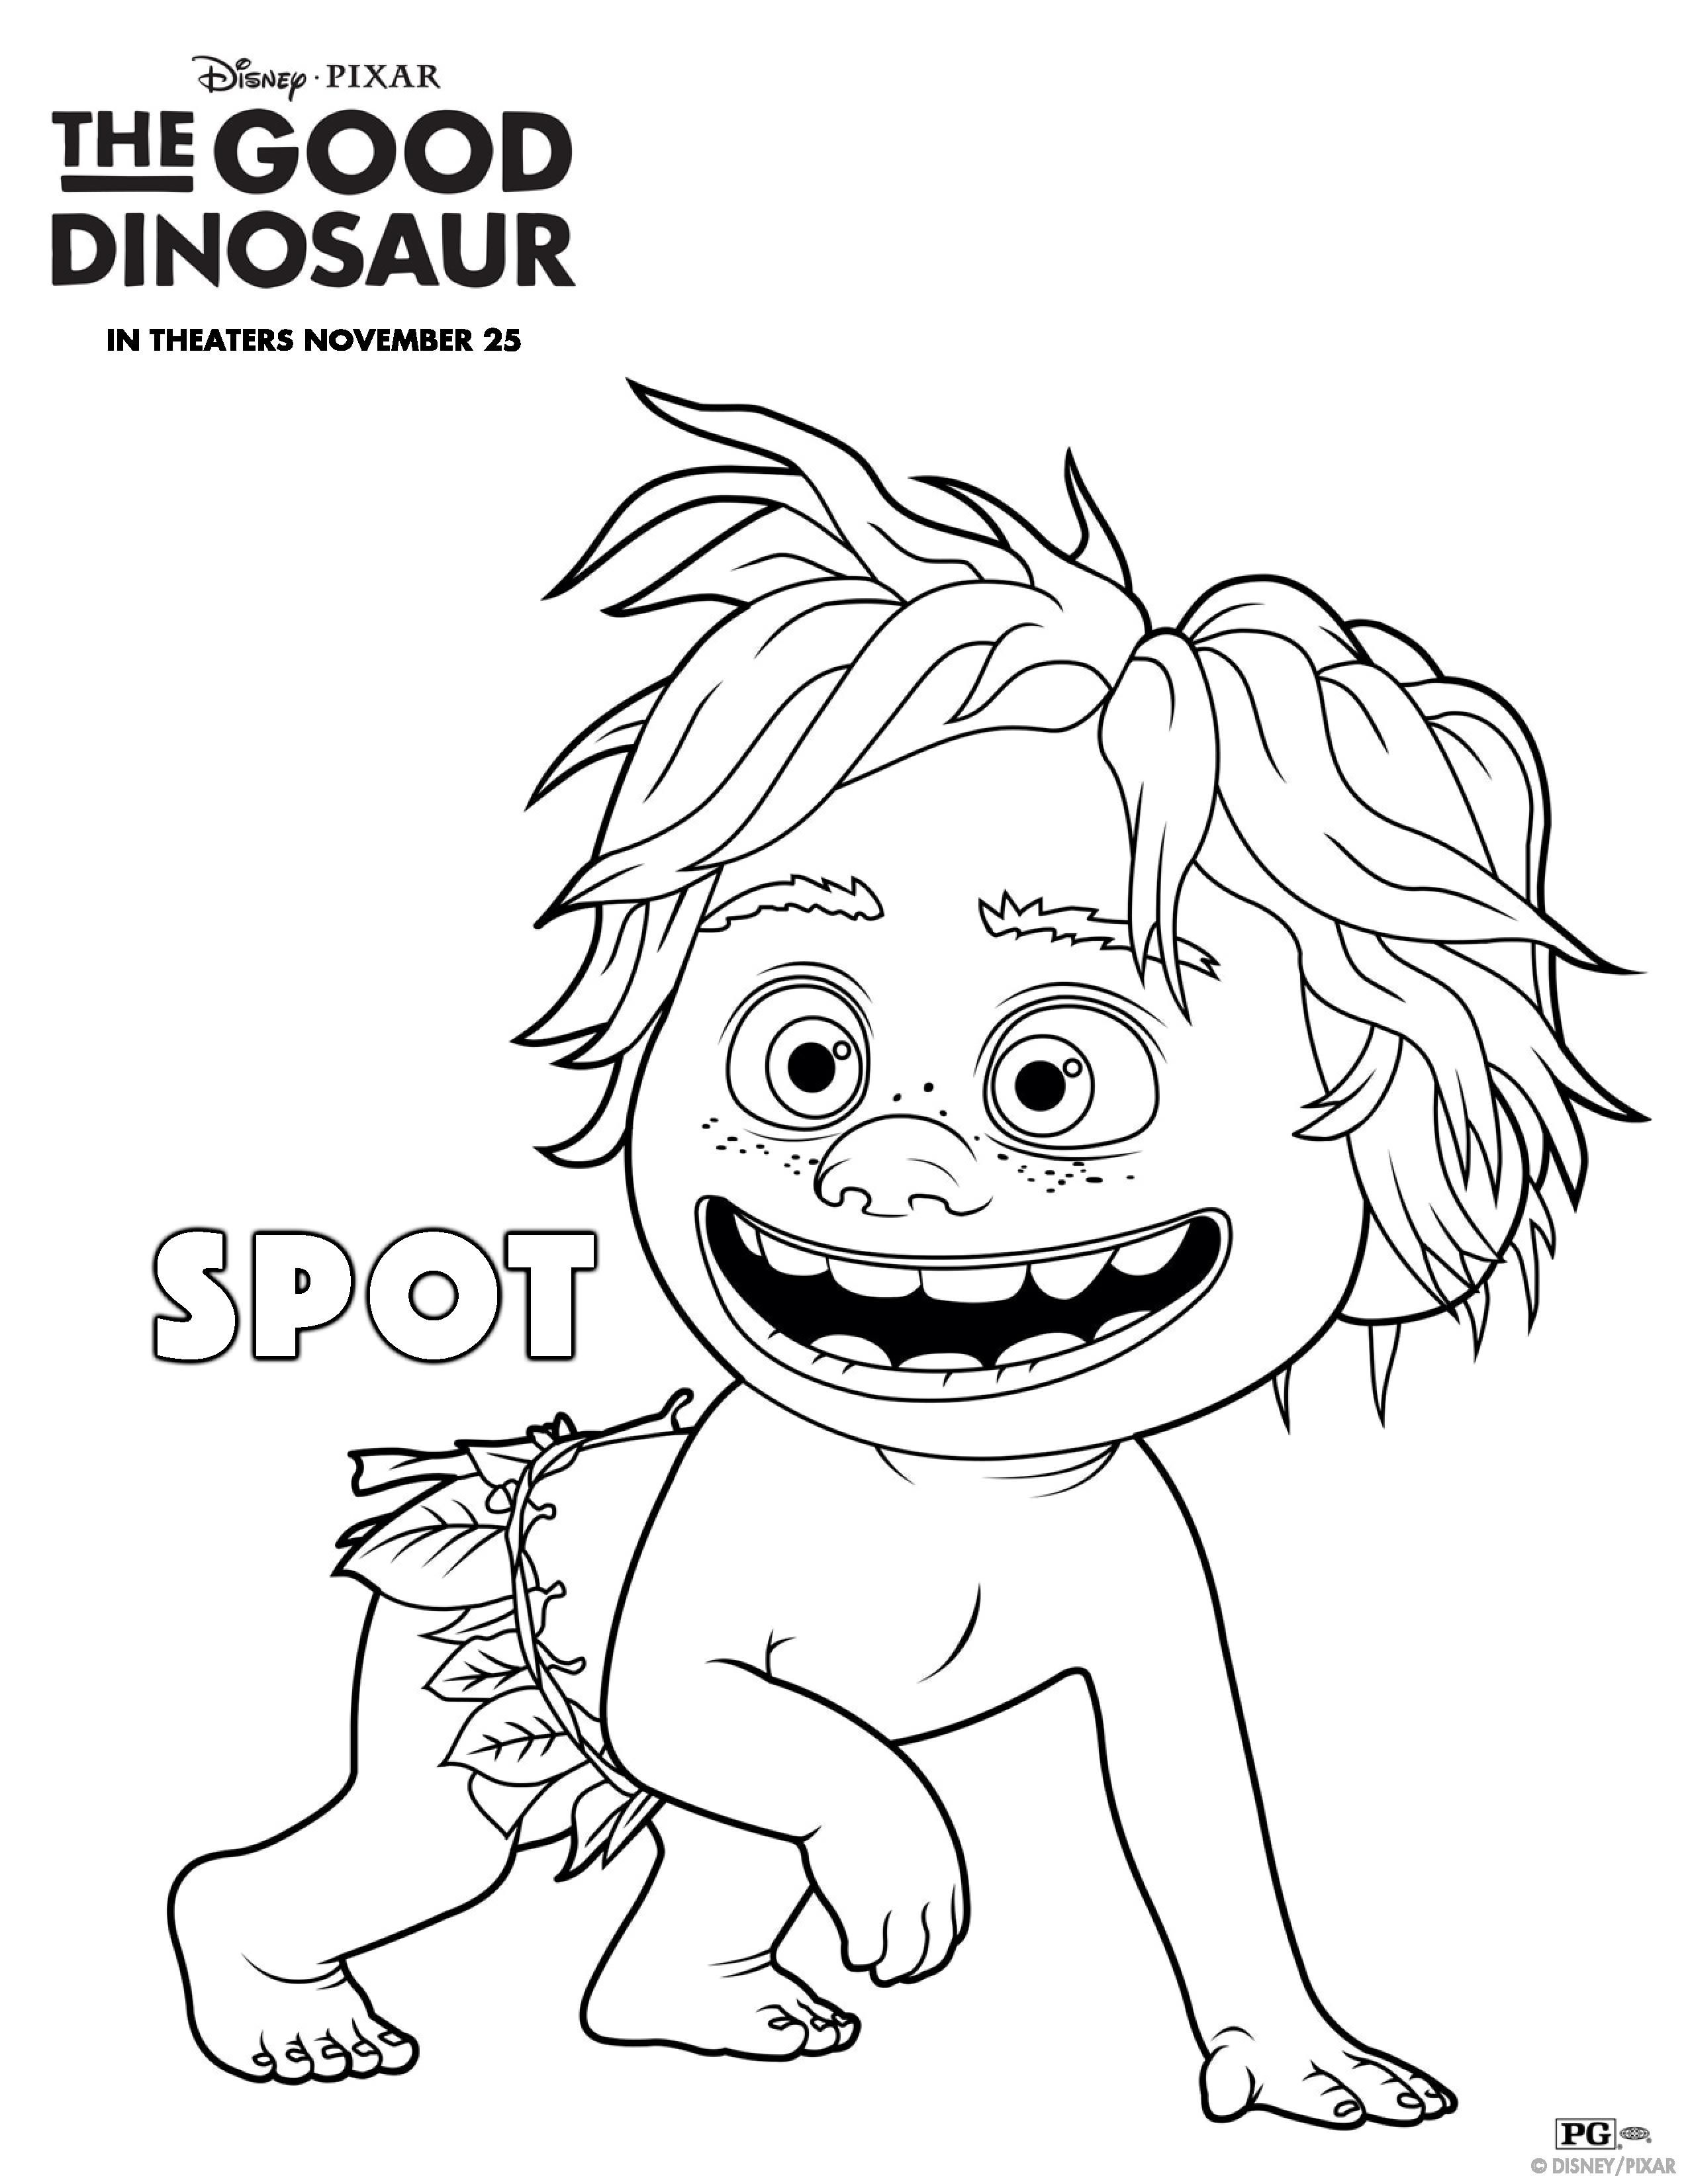 The-Good-Dinosaur-Spot-Coloring-Page | Fun With The Good Dinosaur ...